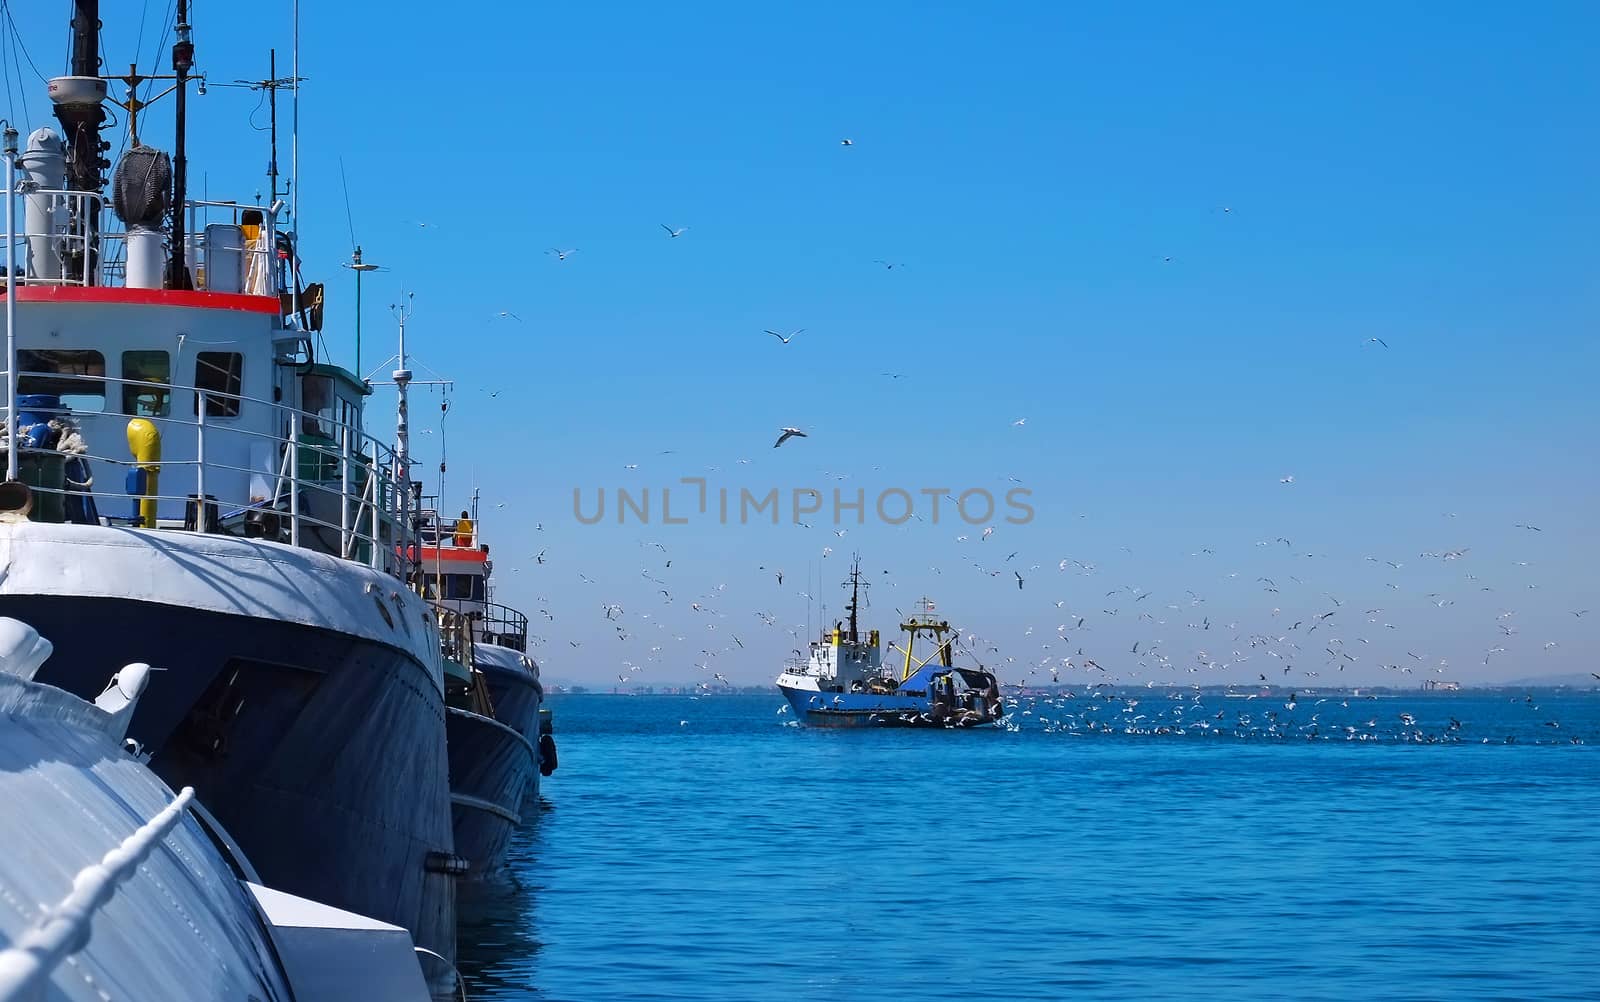 Seagulls hovering over a fishing ship. by leventina